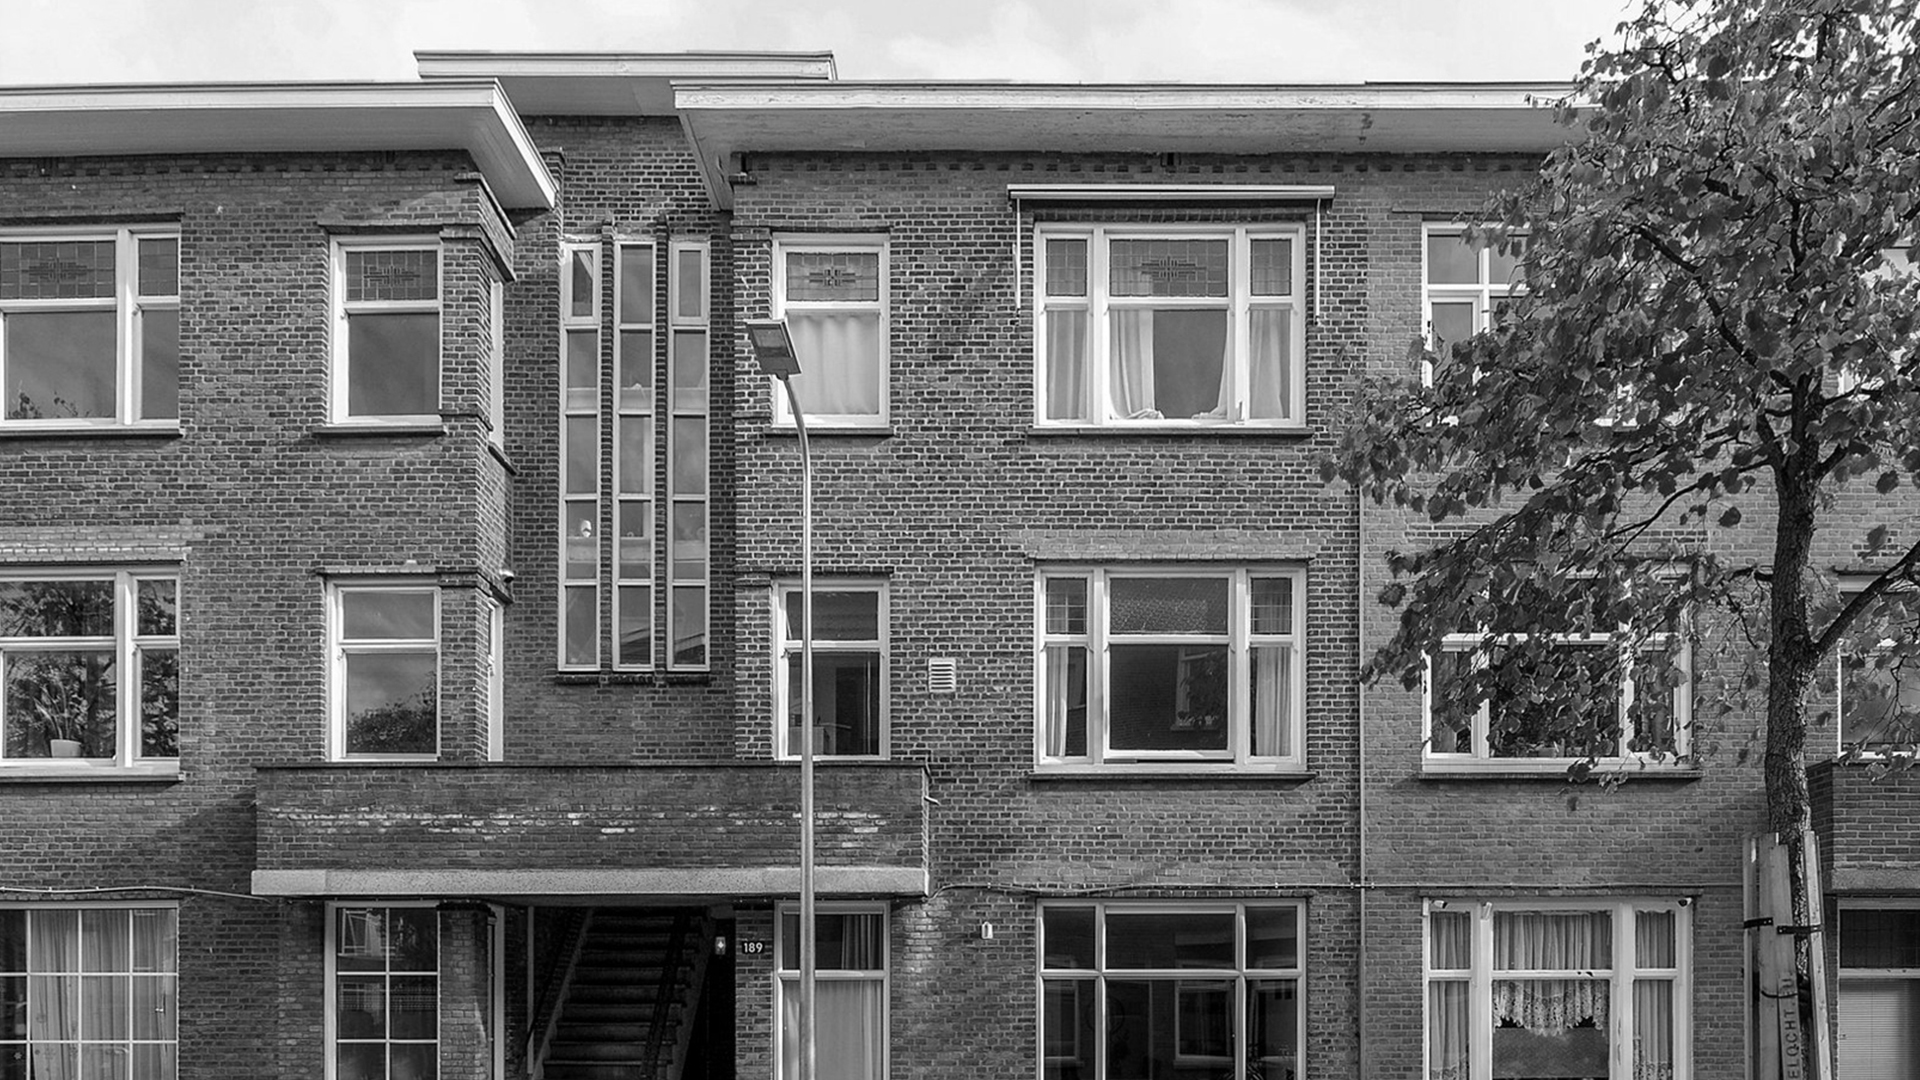 Studio and Space - The Hague Residence